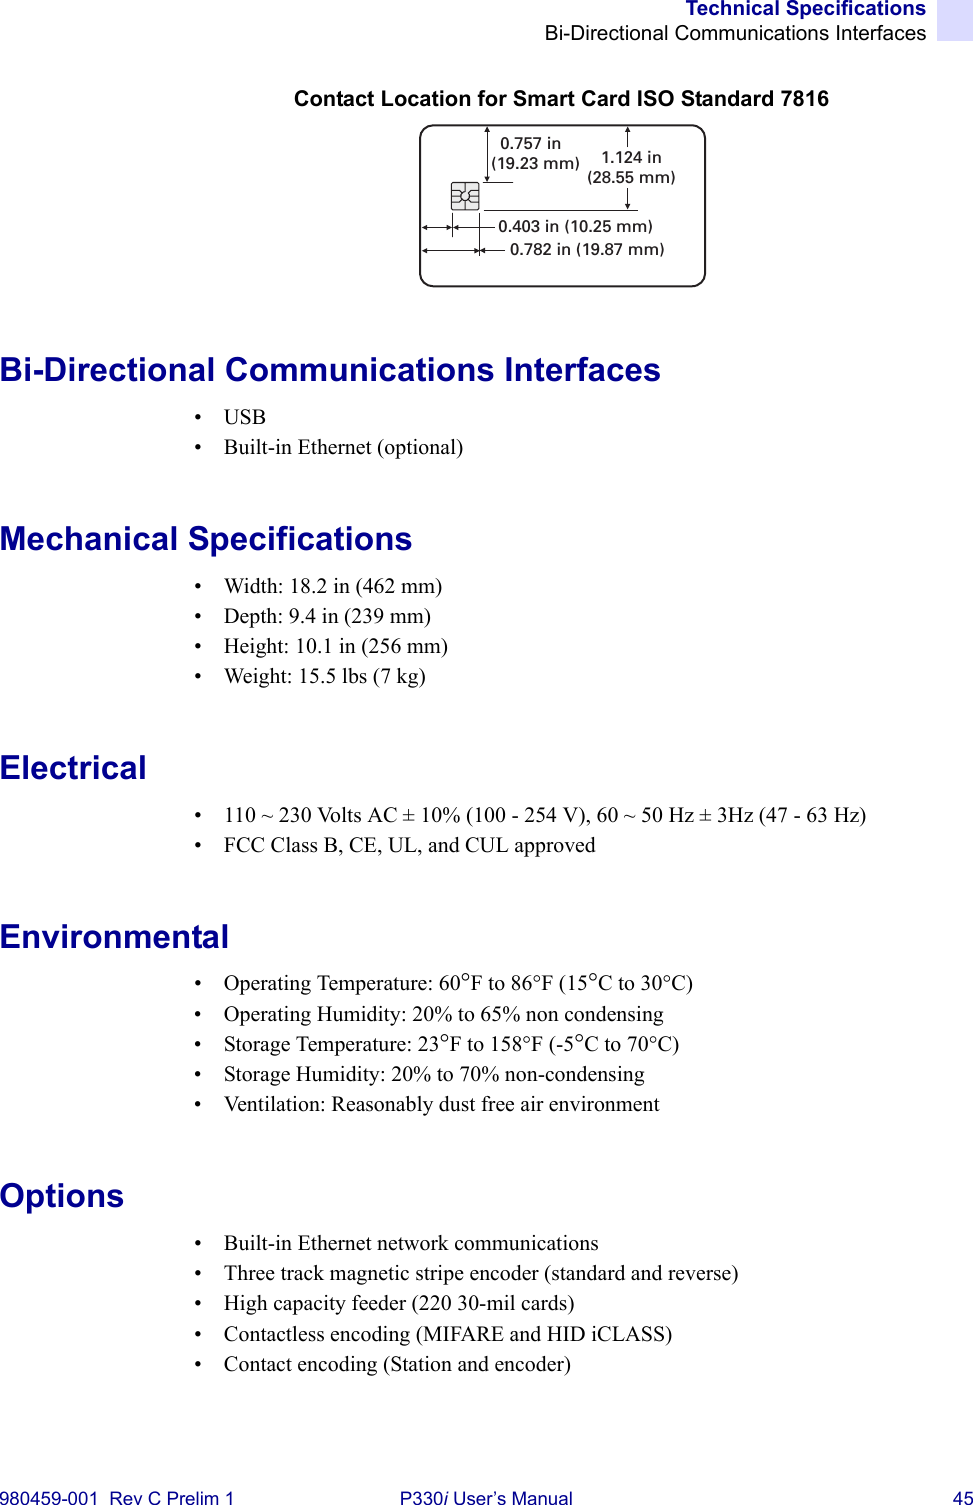 Technical SpecificationsBi-Directional Communications Interfaces980459-001  Rev C Prelim 1 P330i User’s Manual 45Contact Location for Smart Card ISO Standard 7816Bi-Directional Communications Interfaces•USB• Built-in Ethernet (optional)Mechanical Specifications• Width: 18.2 in (462 mm)• Depth: 9.4 in (239 mm)• Height: 10.1 in (256 mm)• Weight: 15.5 lbs (7 kg)Electrical• 110 ~ 230 Volts AC ± 10% (100 - 254 V), 60 ~ 50 Hz ± 3Hz (47 - 63 Hz)• FCC Class B, CE, UL, and CUL approvedEnvironmental• Operating Temperature: 60°F to 86°F (15°C to 30°C)• Operating Humidity: 20% to 65% non condensing• Storage Temperature: 23°F to 158°F (-5°C to 70°C)• Storage Humidity: 20% to 70% non-condensing• Ventilation: Reasonably dust free air environmentOptions• Built-in Ethernet network communications• Three track magnetic stripe encoder (standard and reverse)• High capacity feeder (220 30-mil cards)• Contactless encoding (MIFARE and HID iCLASS)• Contact encoding (Station and encoder)0.403 in (10.25 mm)0.782 in (19.87 mm)0.757 in(19.23 mm) 1.124 in(28.55 mm)